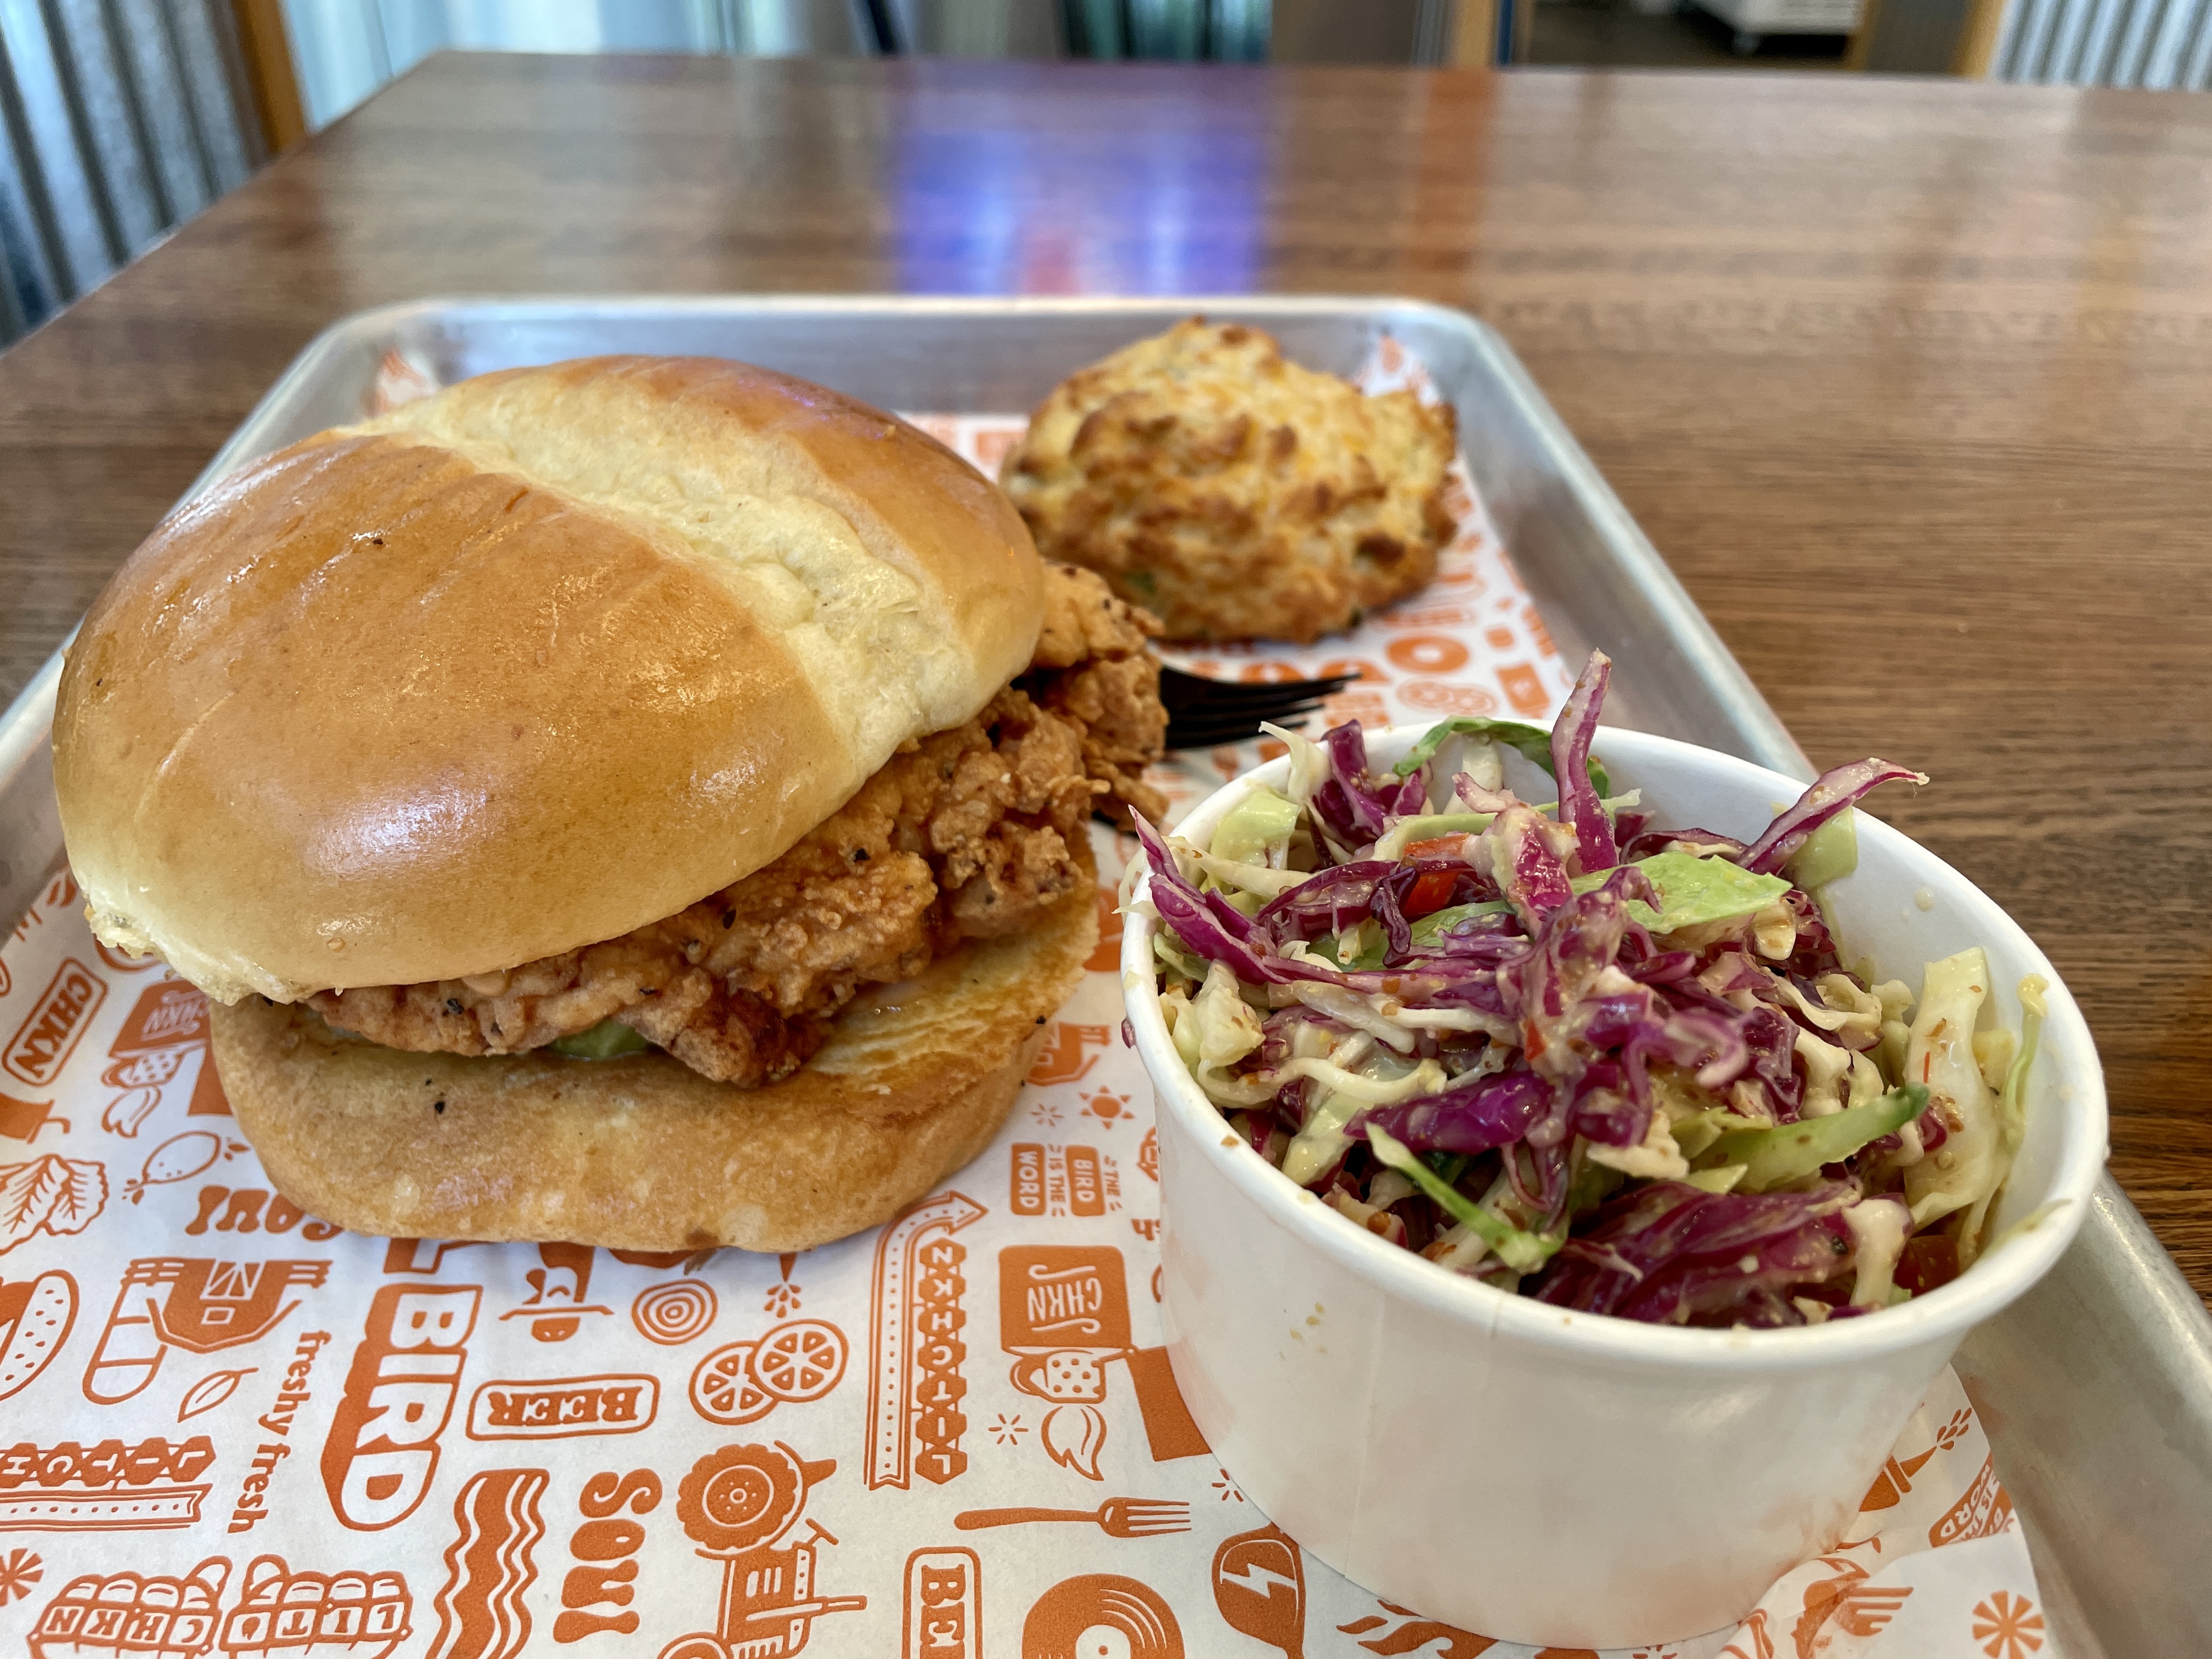 On a silver tray lined with white and orange paper sits a fried chicken sandwich on a brioche bun, a paper container of cole slaw with purple and green cabbage, and a biscuit.